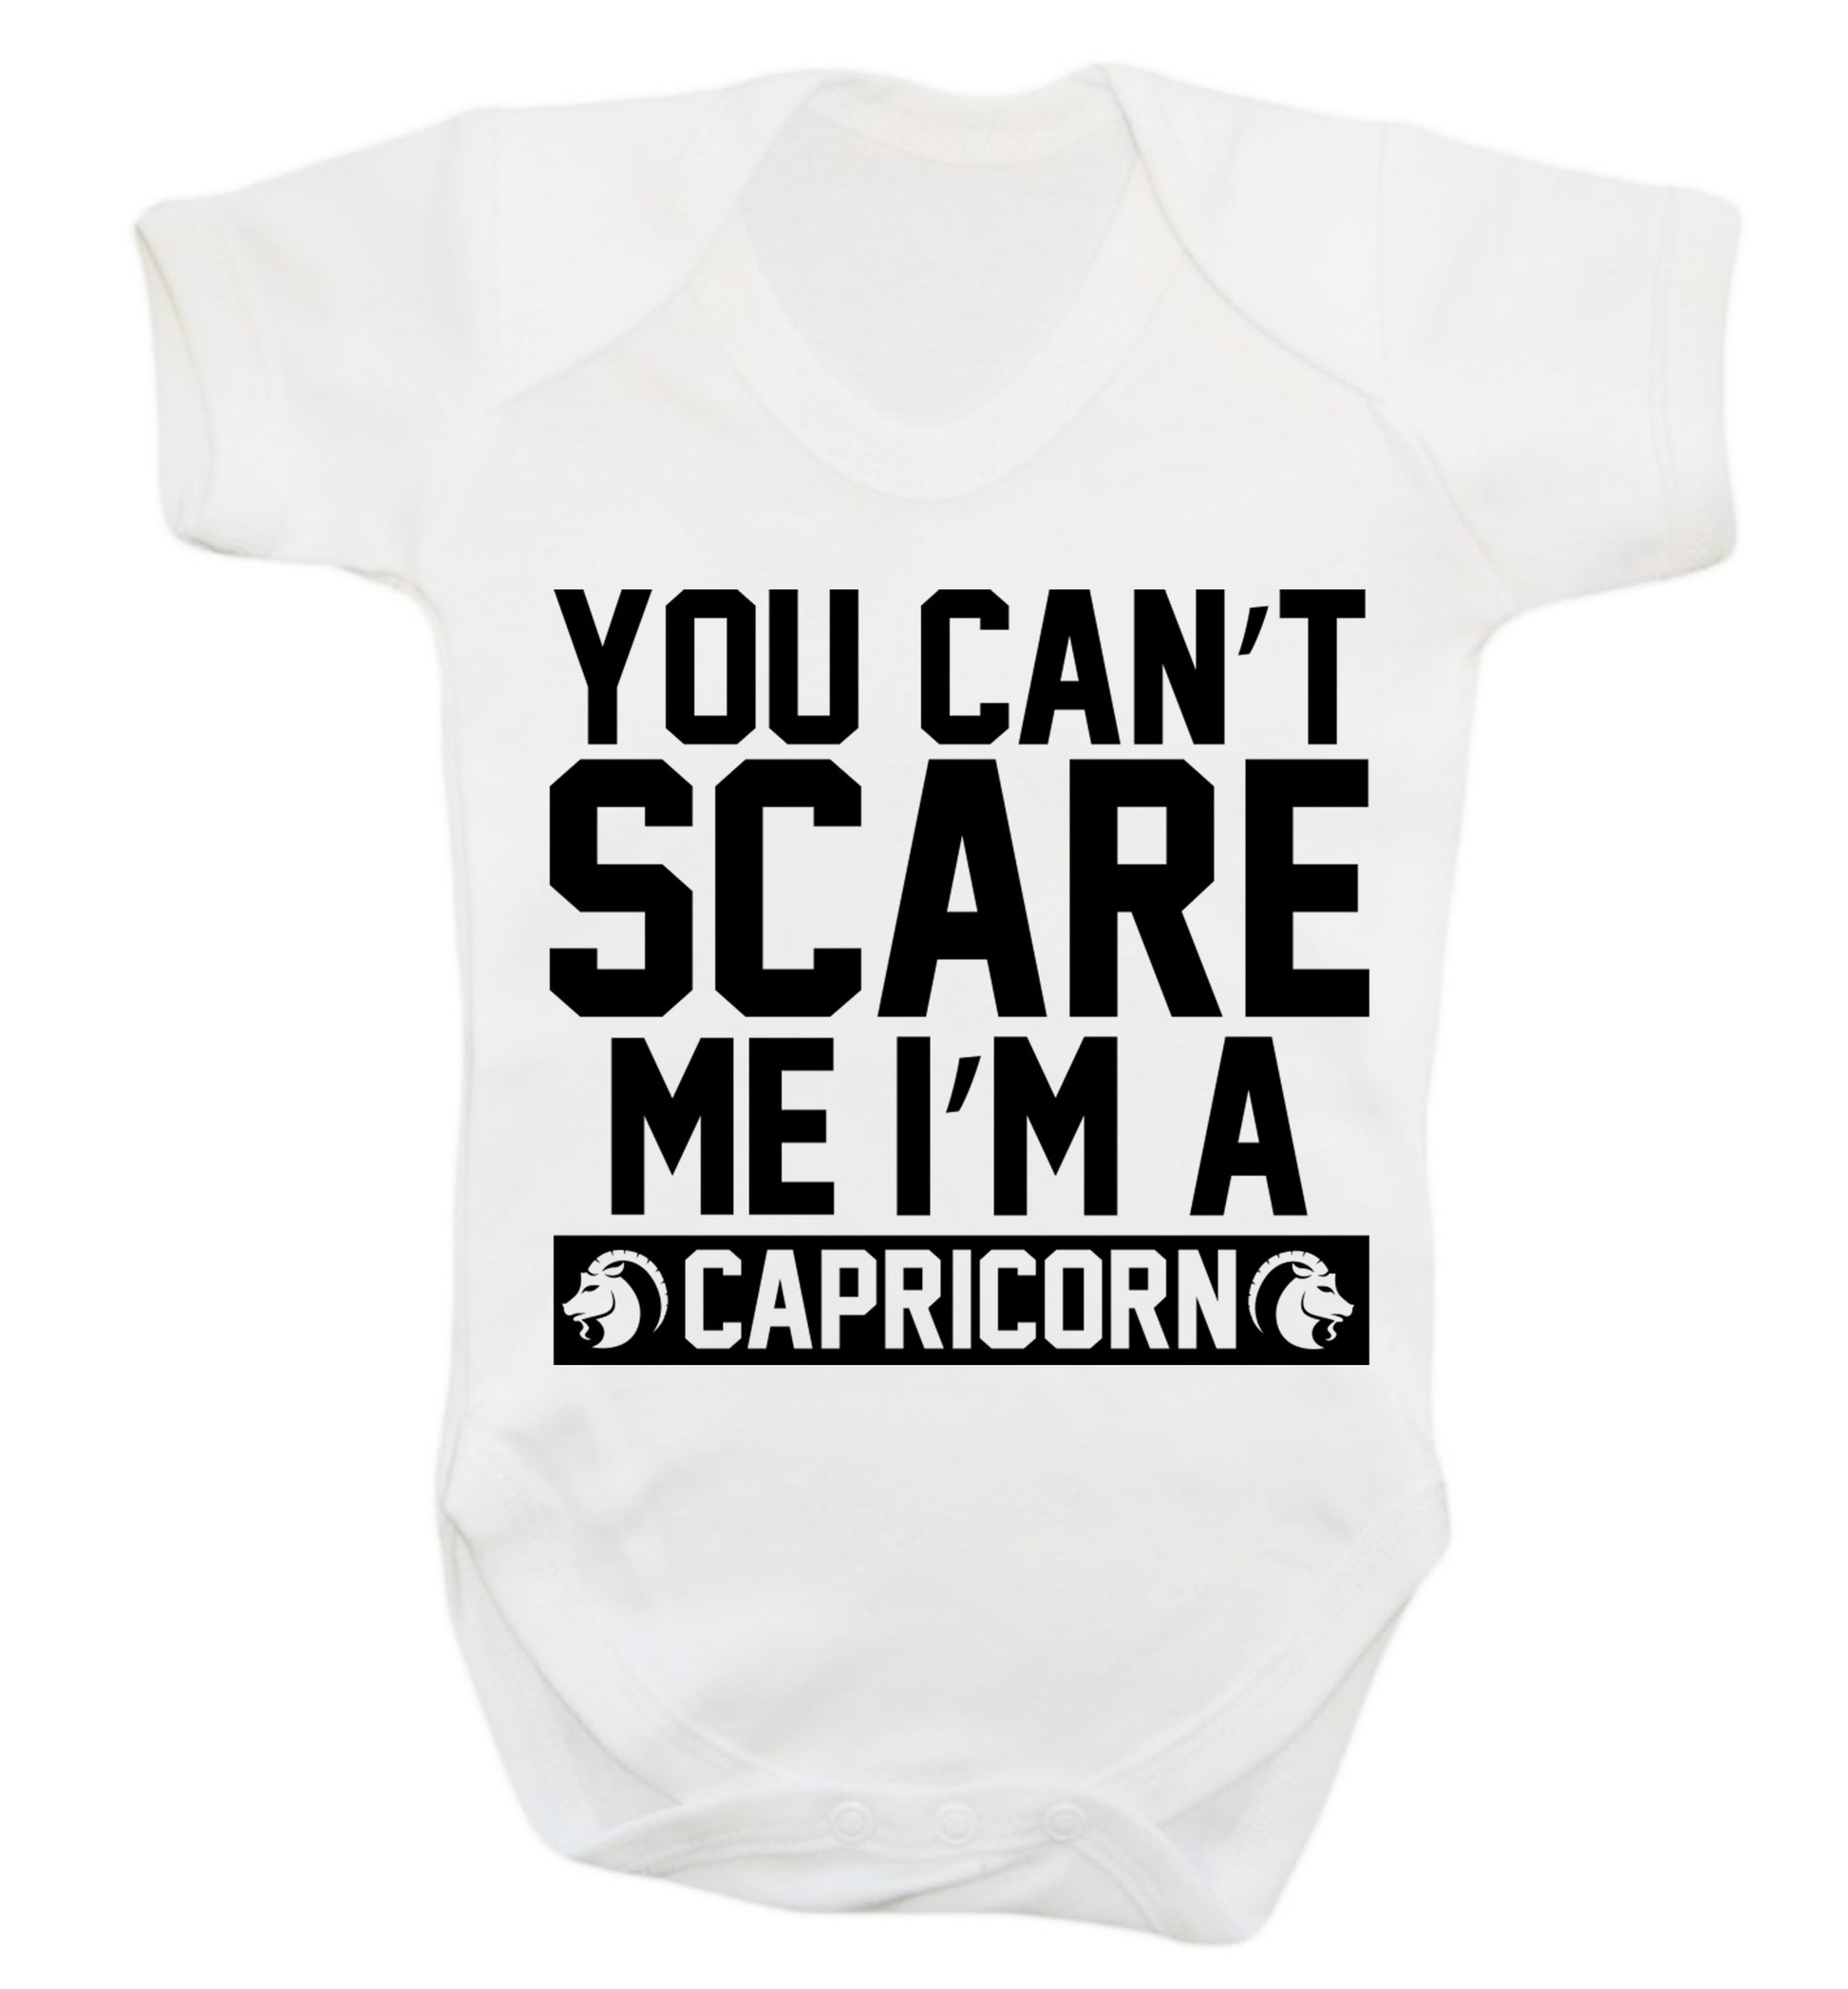 You can't scare me I'm a capricorn Baby Vest white 18-24 months